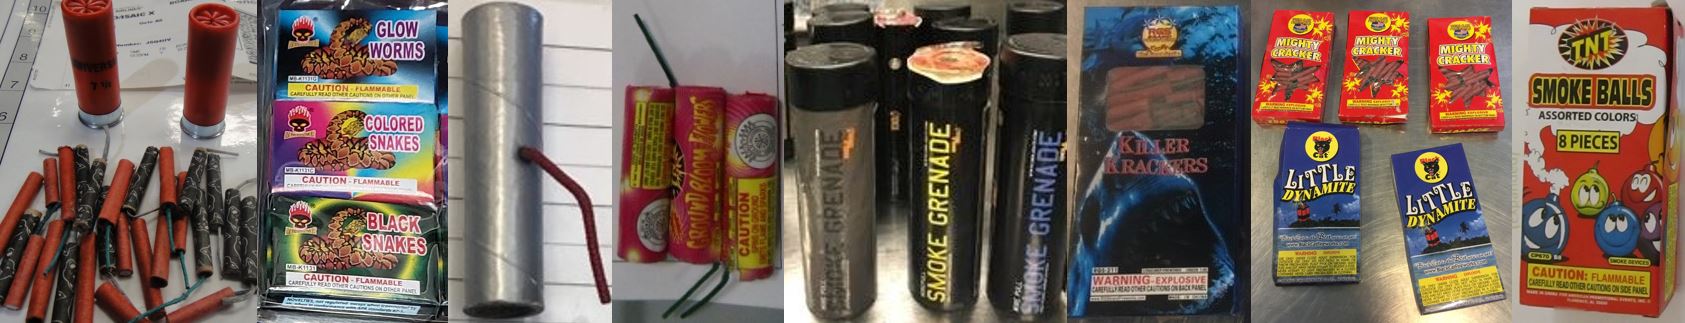 Fireworks are not allowed in either carry-on or checked bags. The fireworks pictured here are just some of the fireworks discovered recently. These were discovered in carry-on and checked bags at ABQ, BNA, BWI, CID, JFK, LAS, OWB, PIT and RIC.